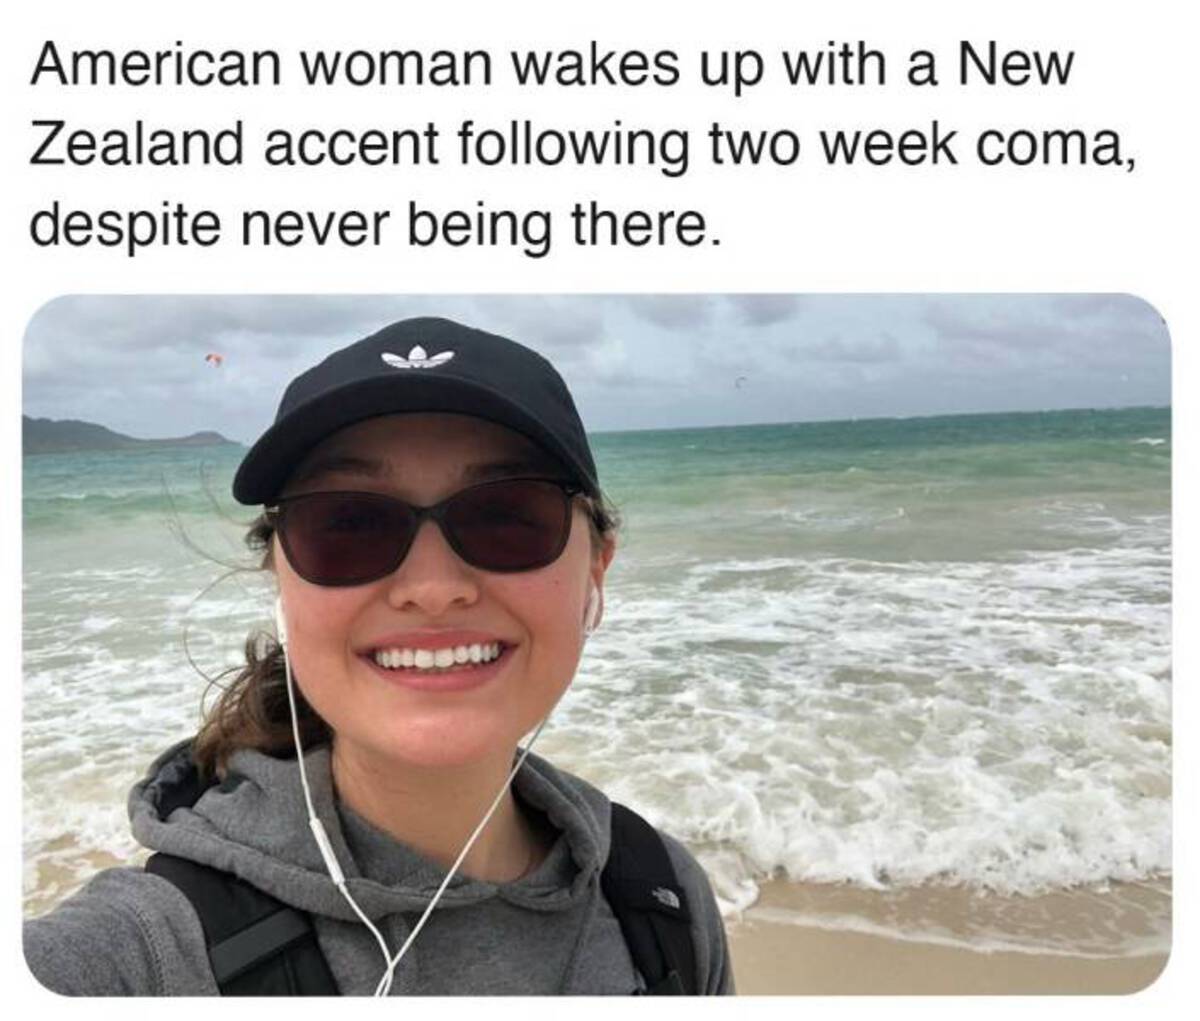 vacation - American woman wakes up with a New Zealand accent ing two week coma, despite never being there.